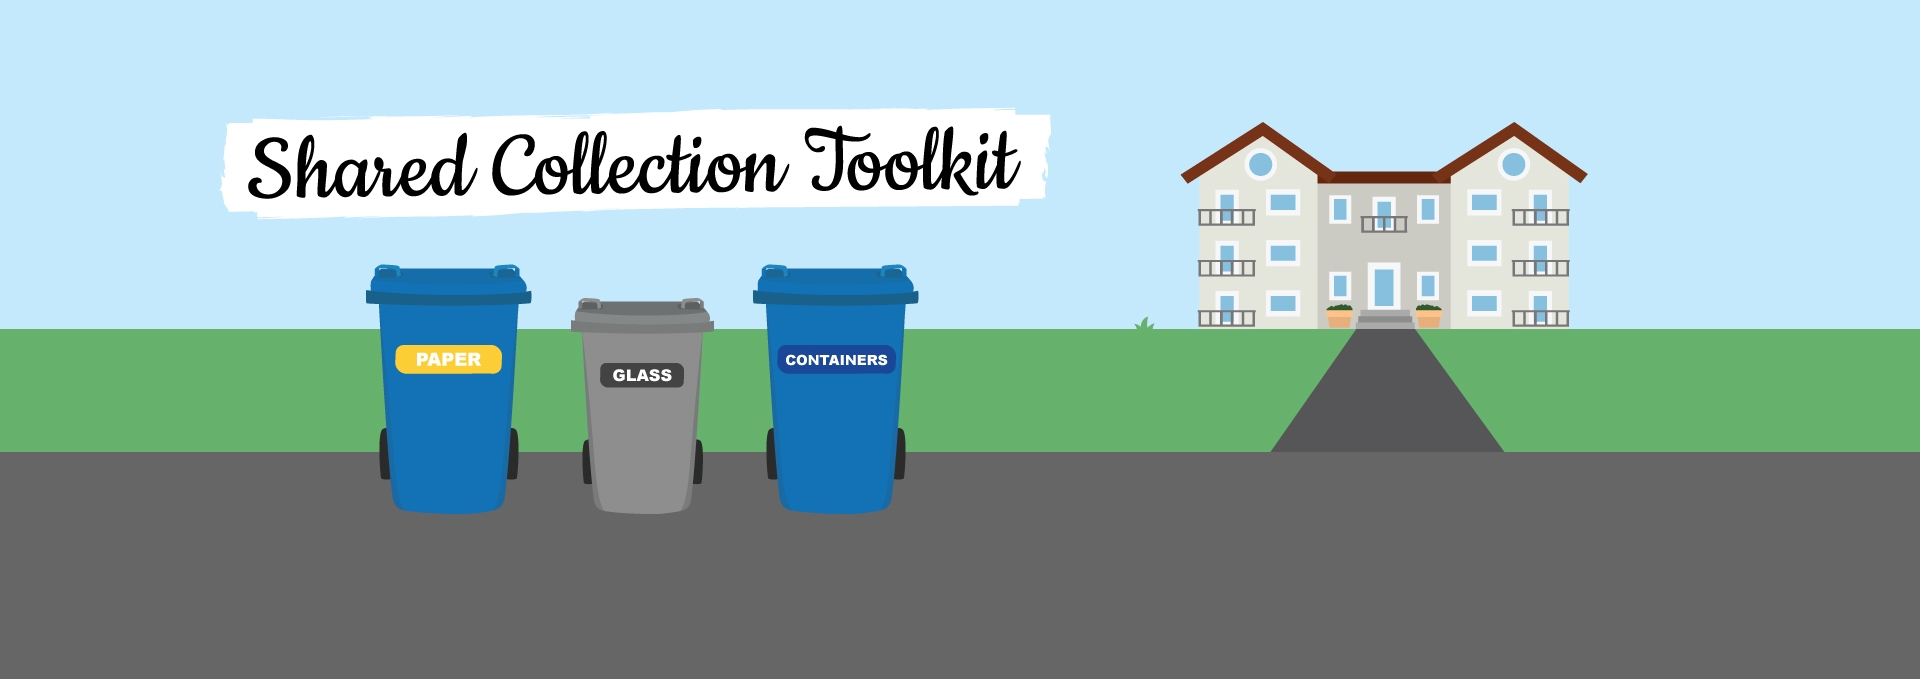 Shared Collection Toolkit